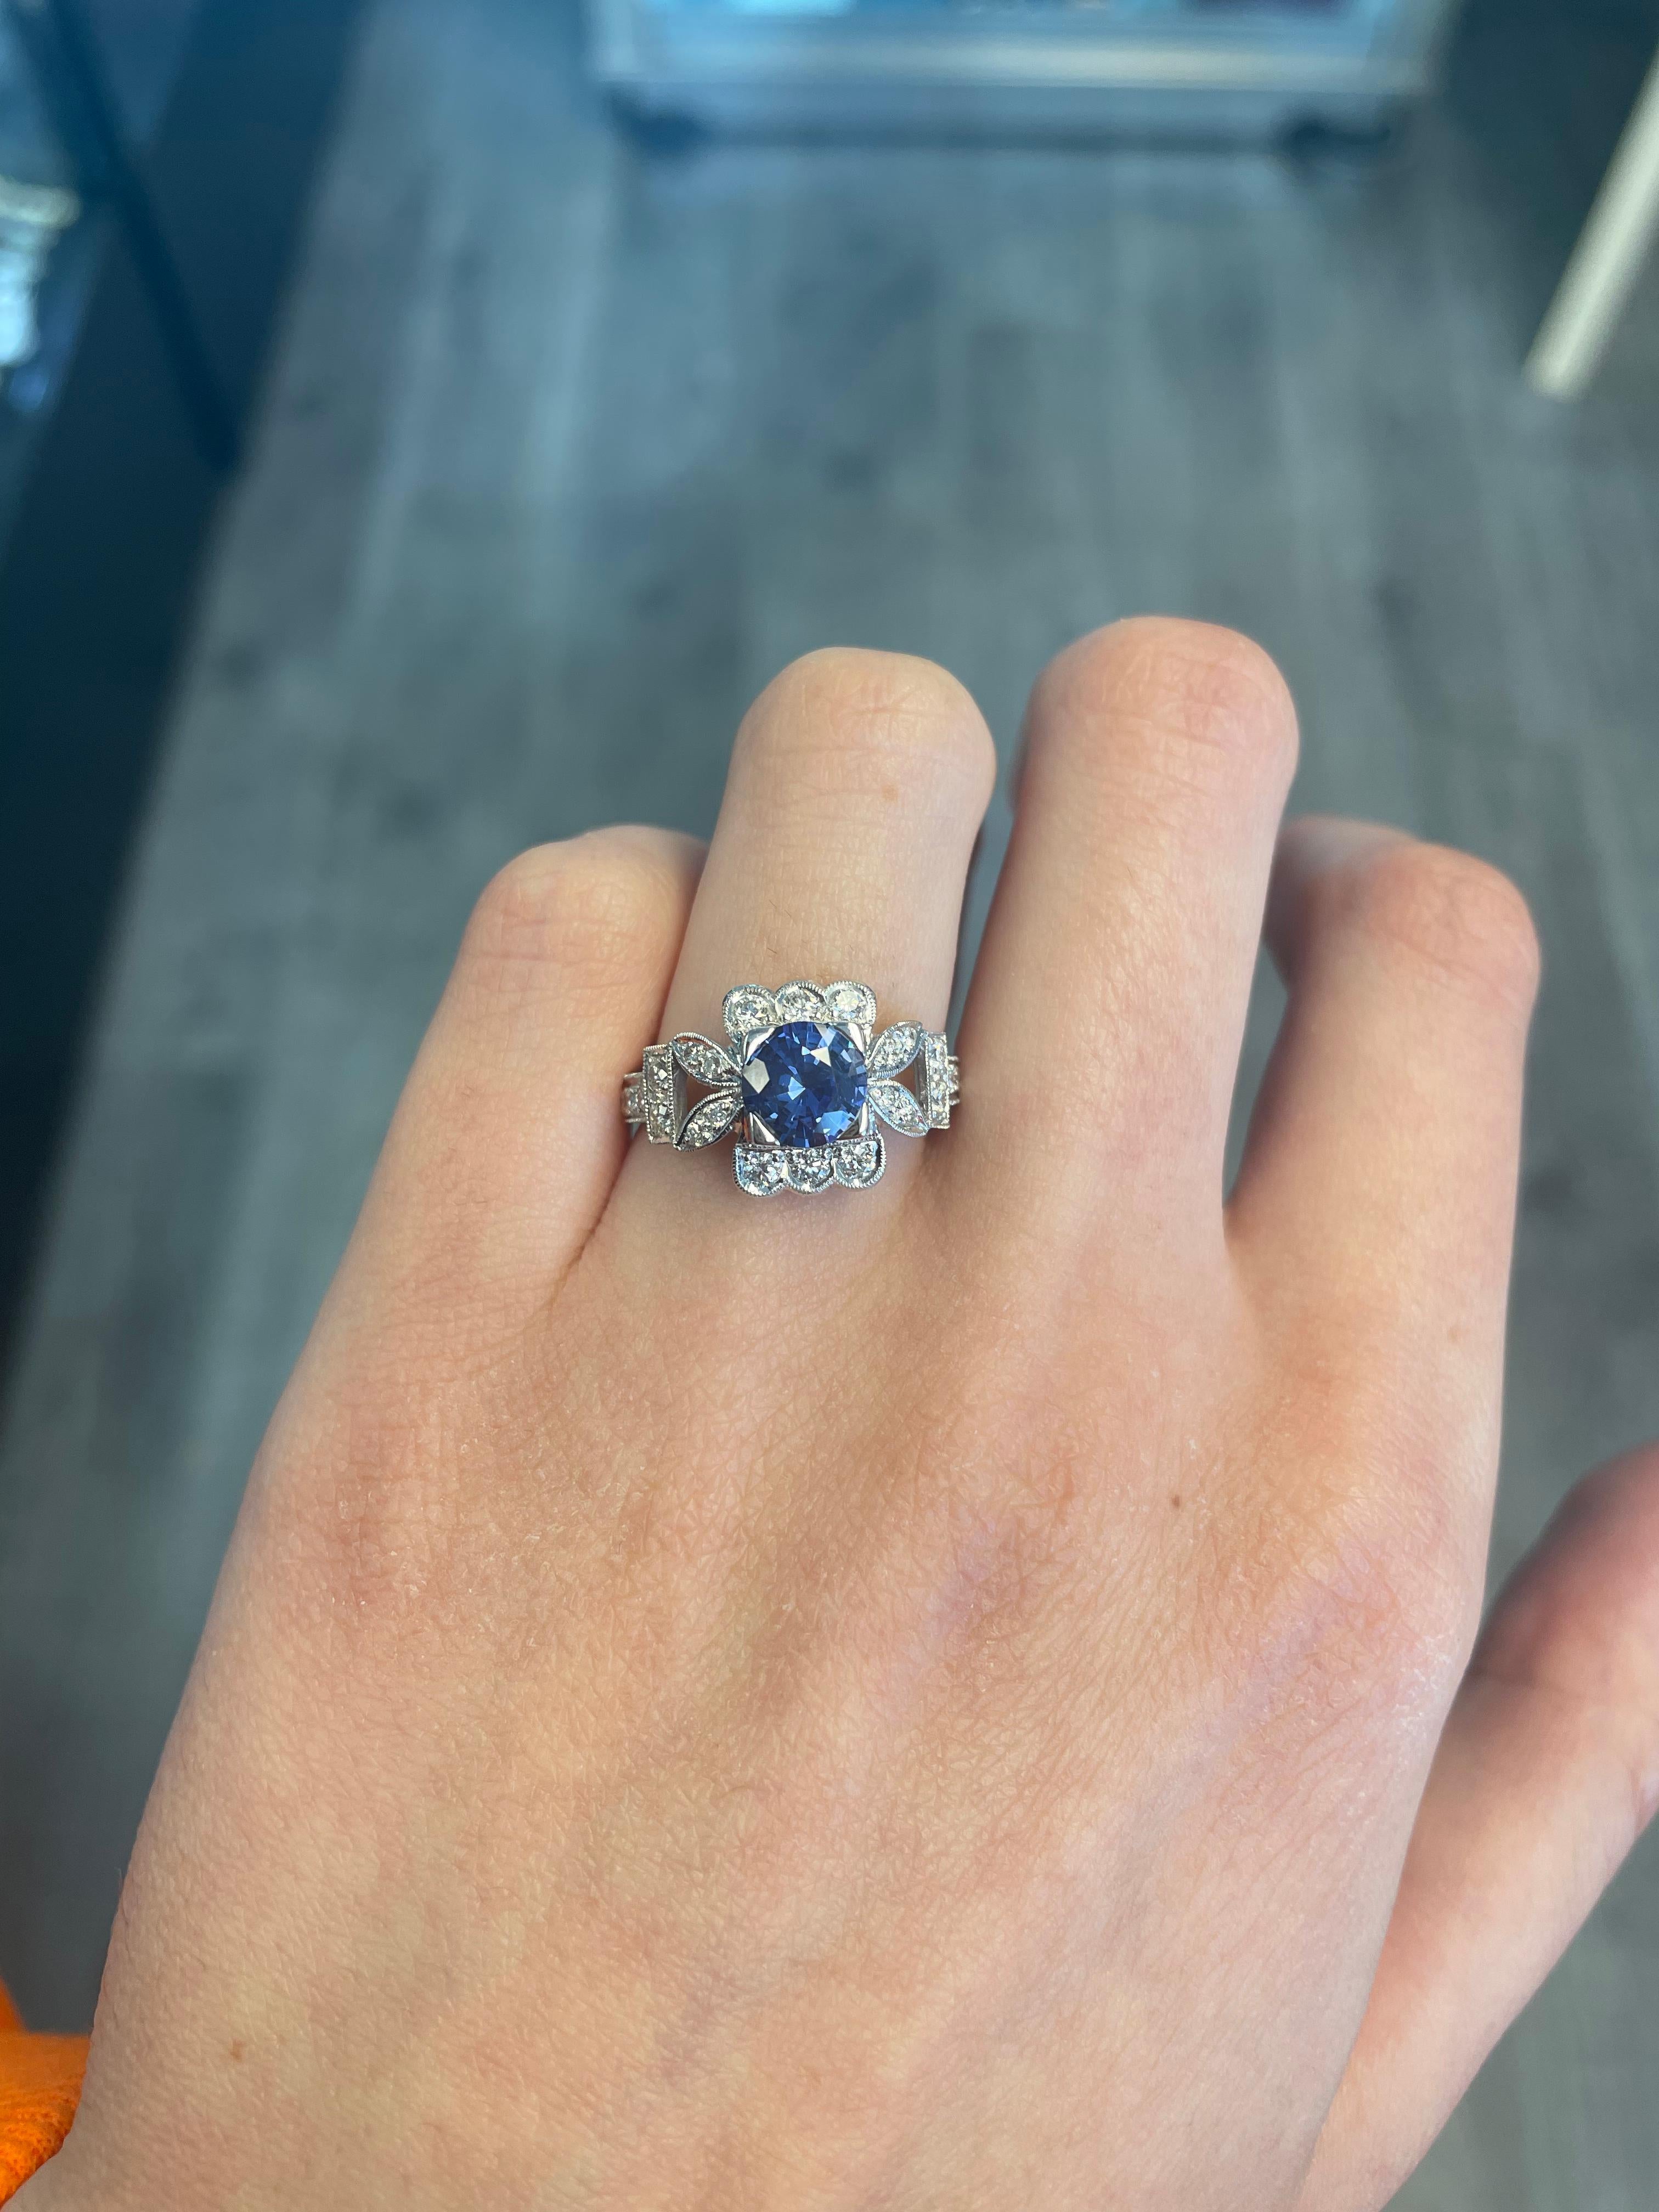 Art Deco style round Ceylon sapphire ring with diamond halo.
1.86 carats total gemstone weight.
Center 1.34 carat round Sri Lankan sapphire heat. Complimented with 0.52 carats of round brilliant diamonds, approximately G/H color and SI clarity. 18k